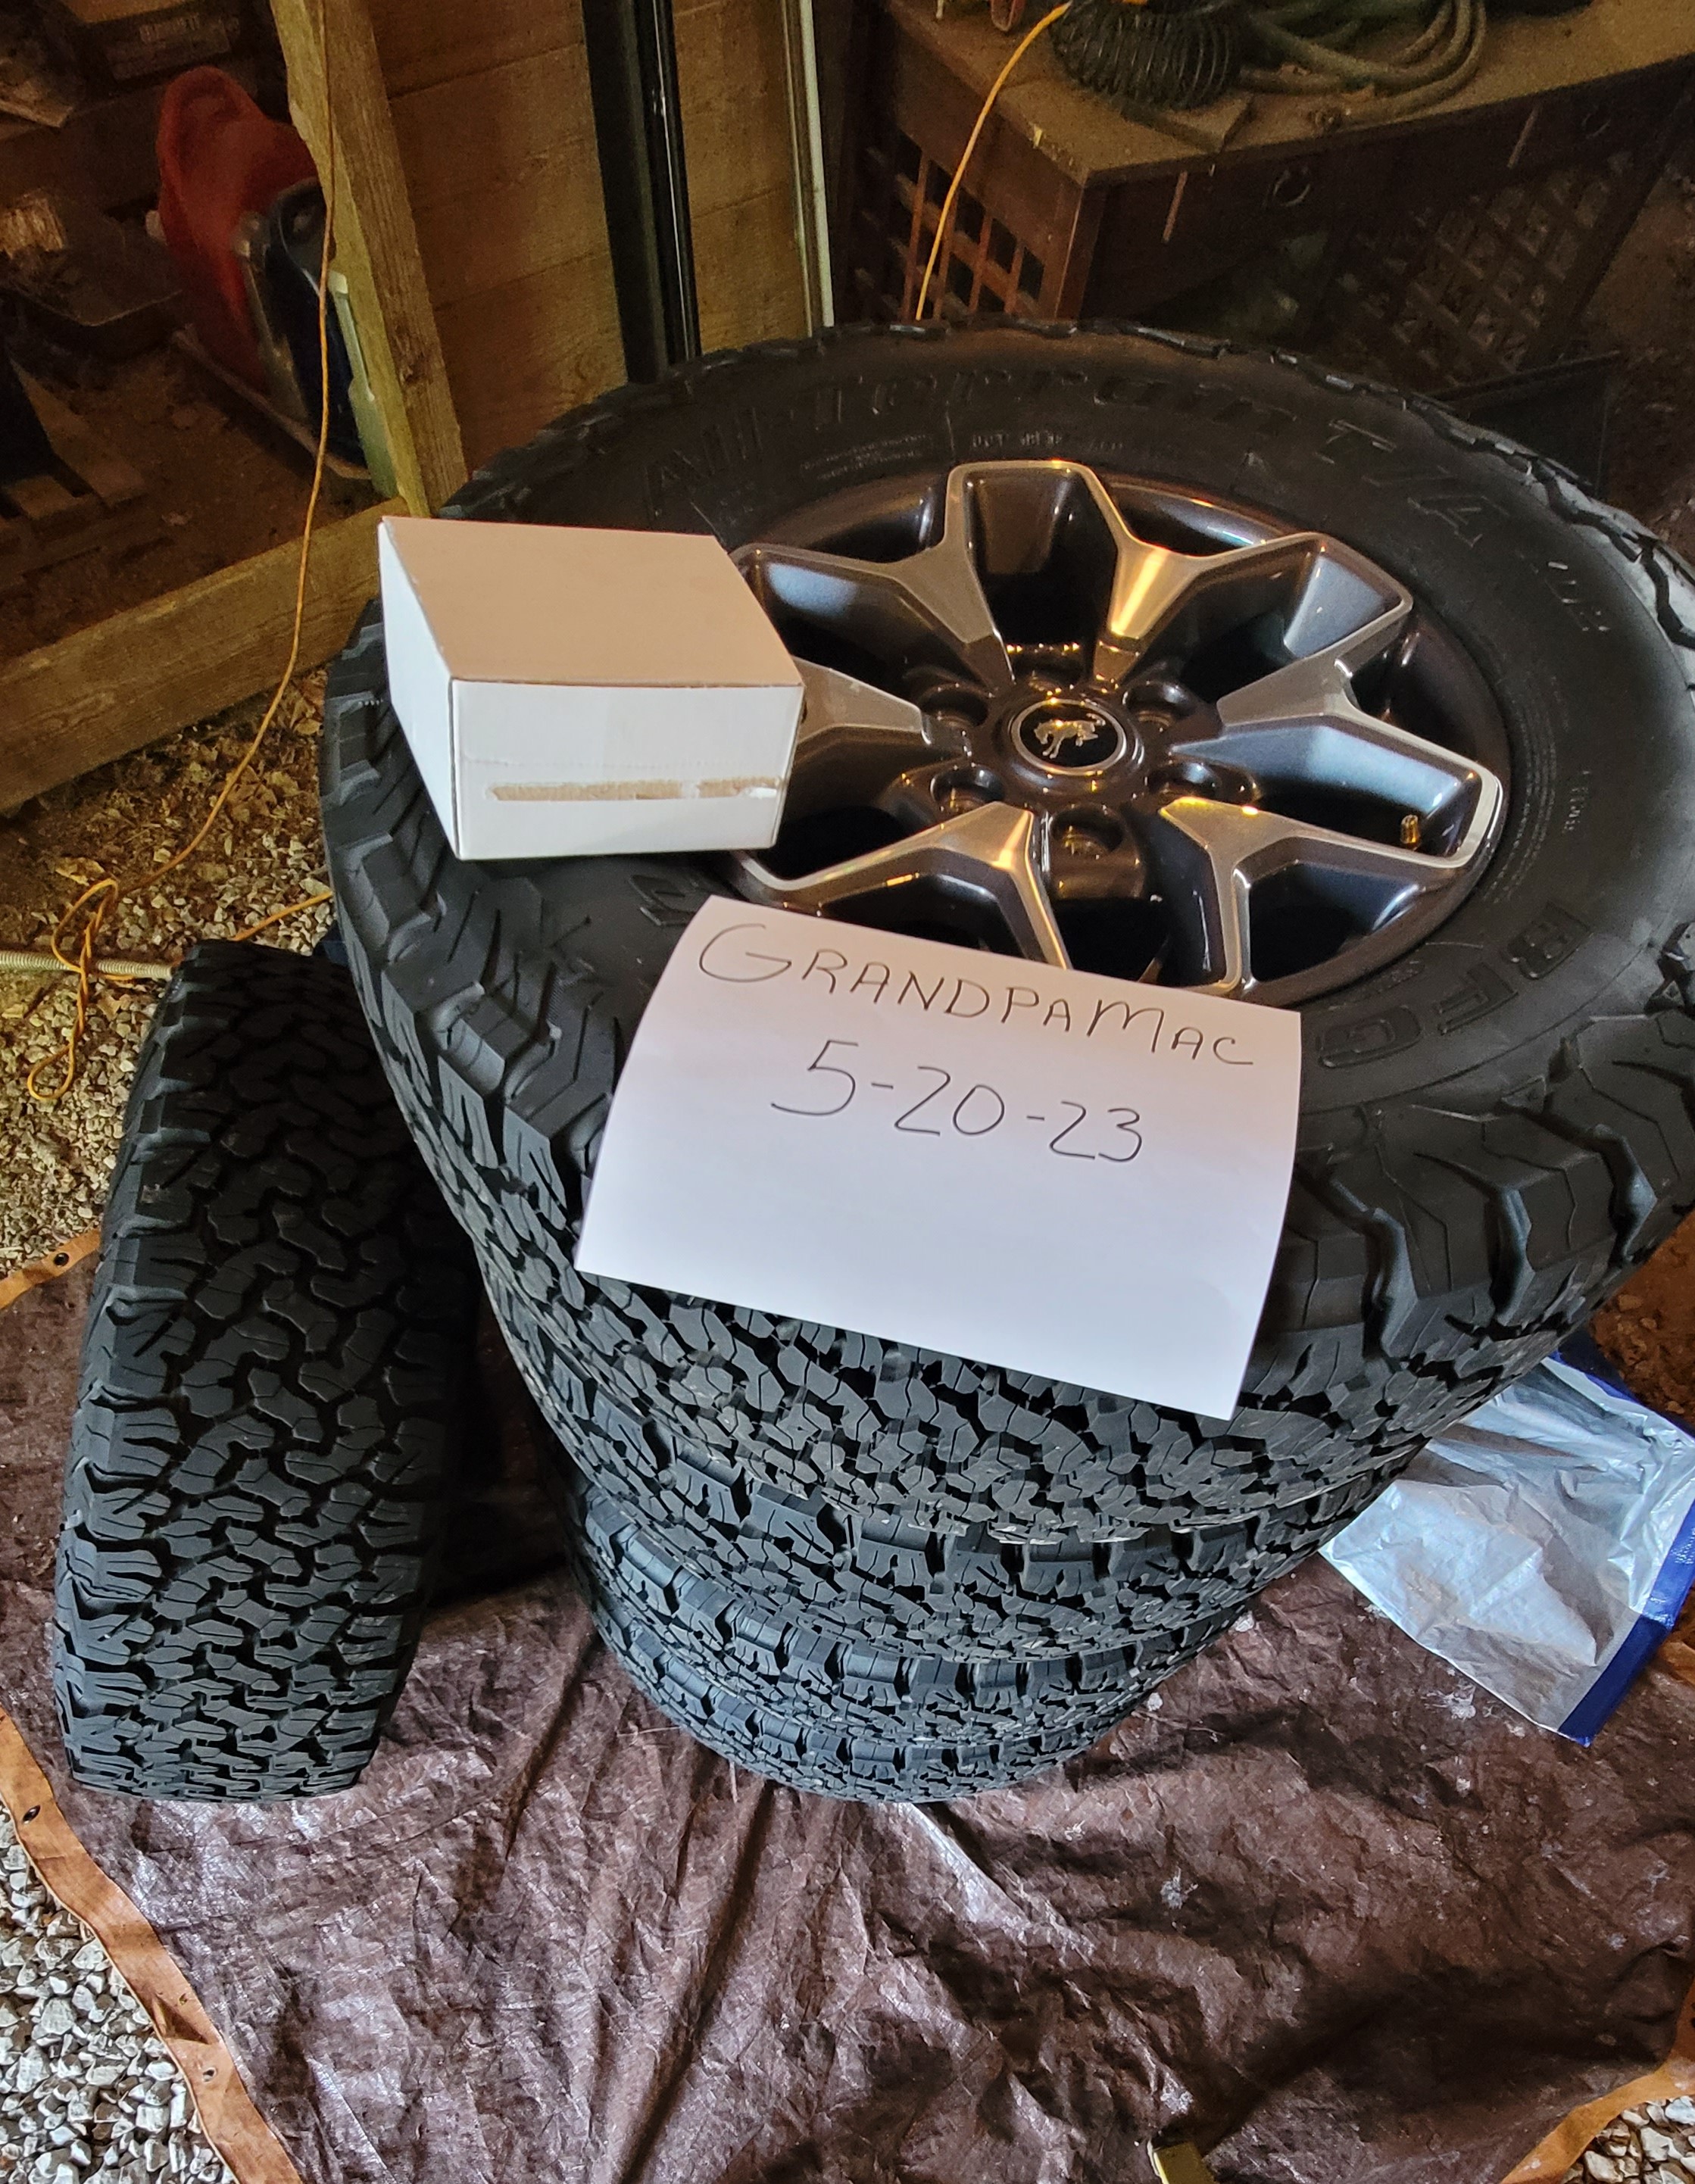 Ford Bronco WTS: 5 - OEM Badlands 17" Wheels with the 33" KO2s Only 900 Miles with Lugnuts - NO TPMS New Price Badlands OEM Wheels and 33 KO2 lu